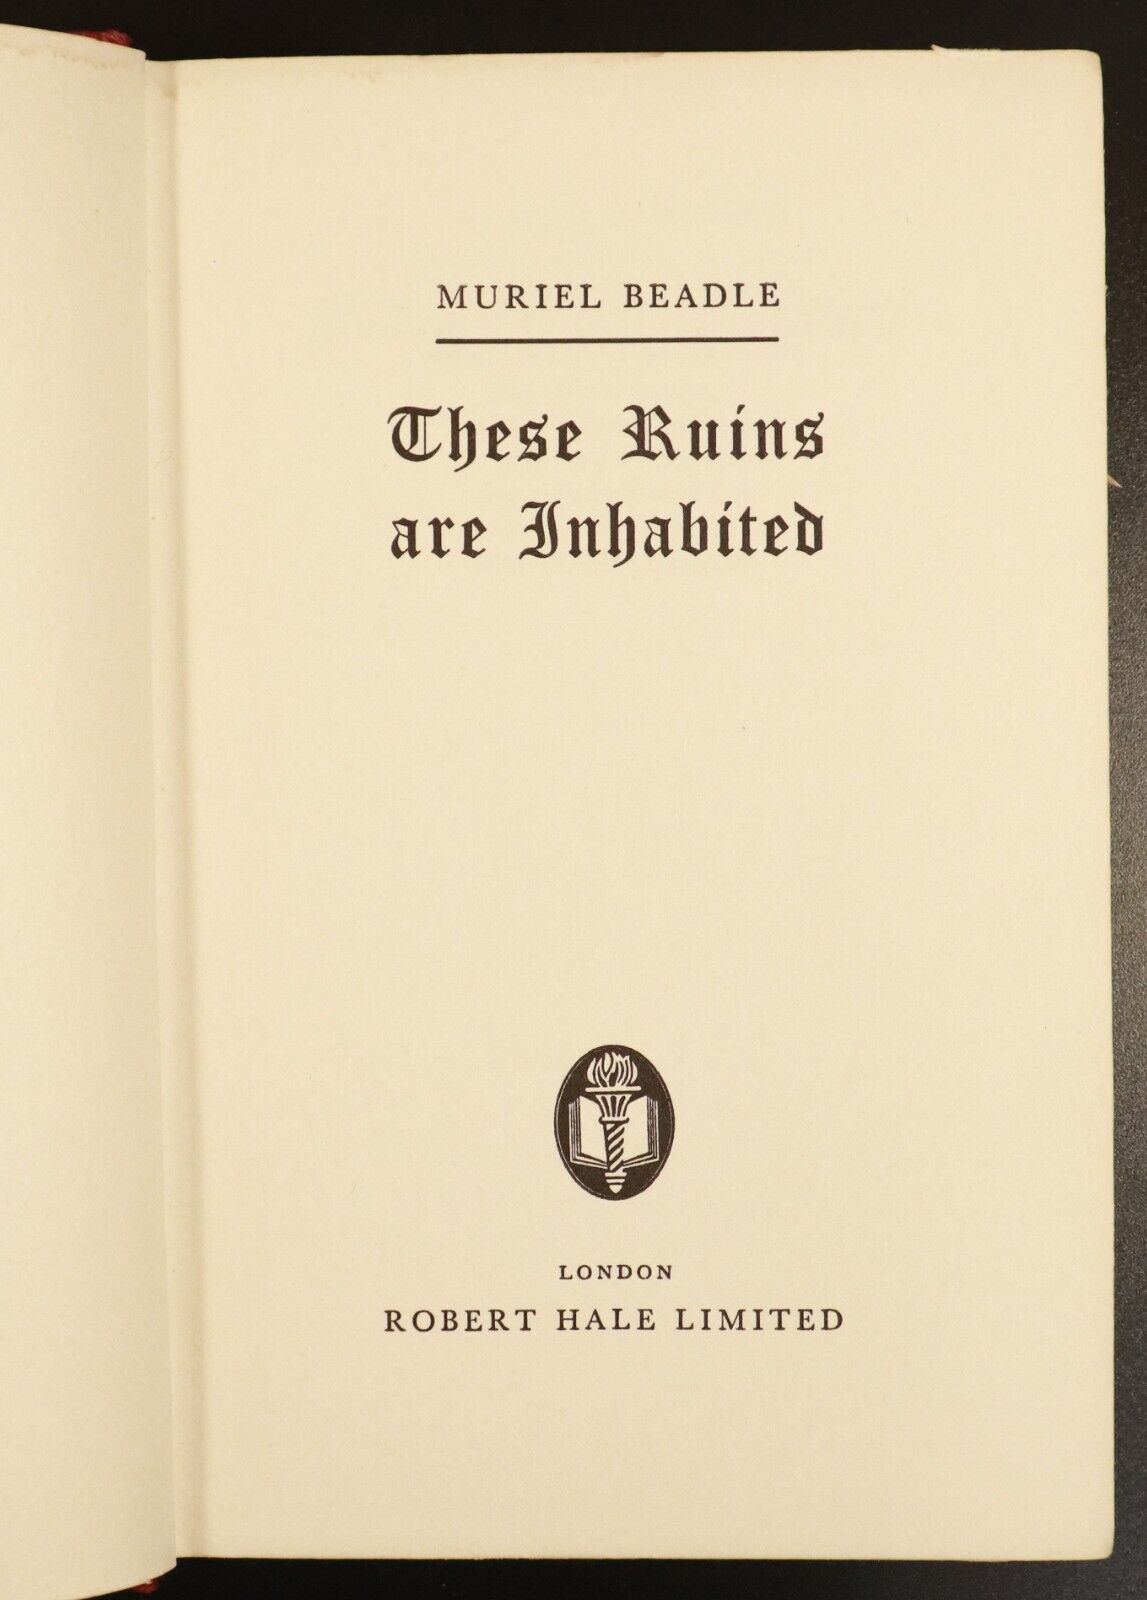 1966 These Ruins Are Inhabited by Muriel Beadle Vintage British Travel Book